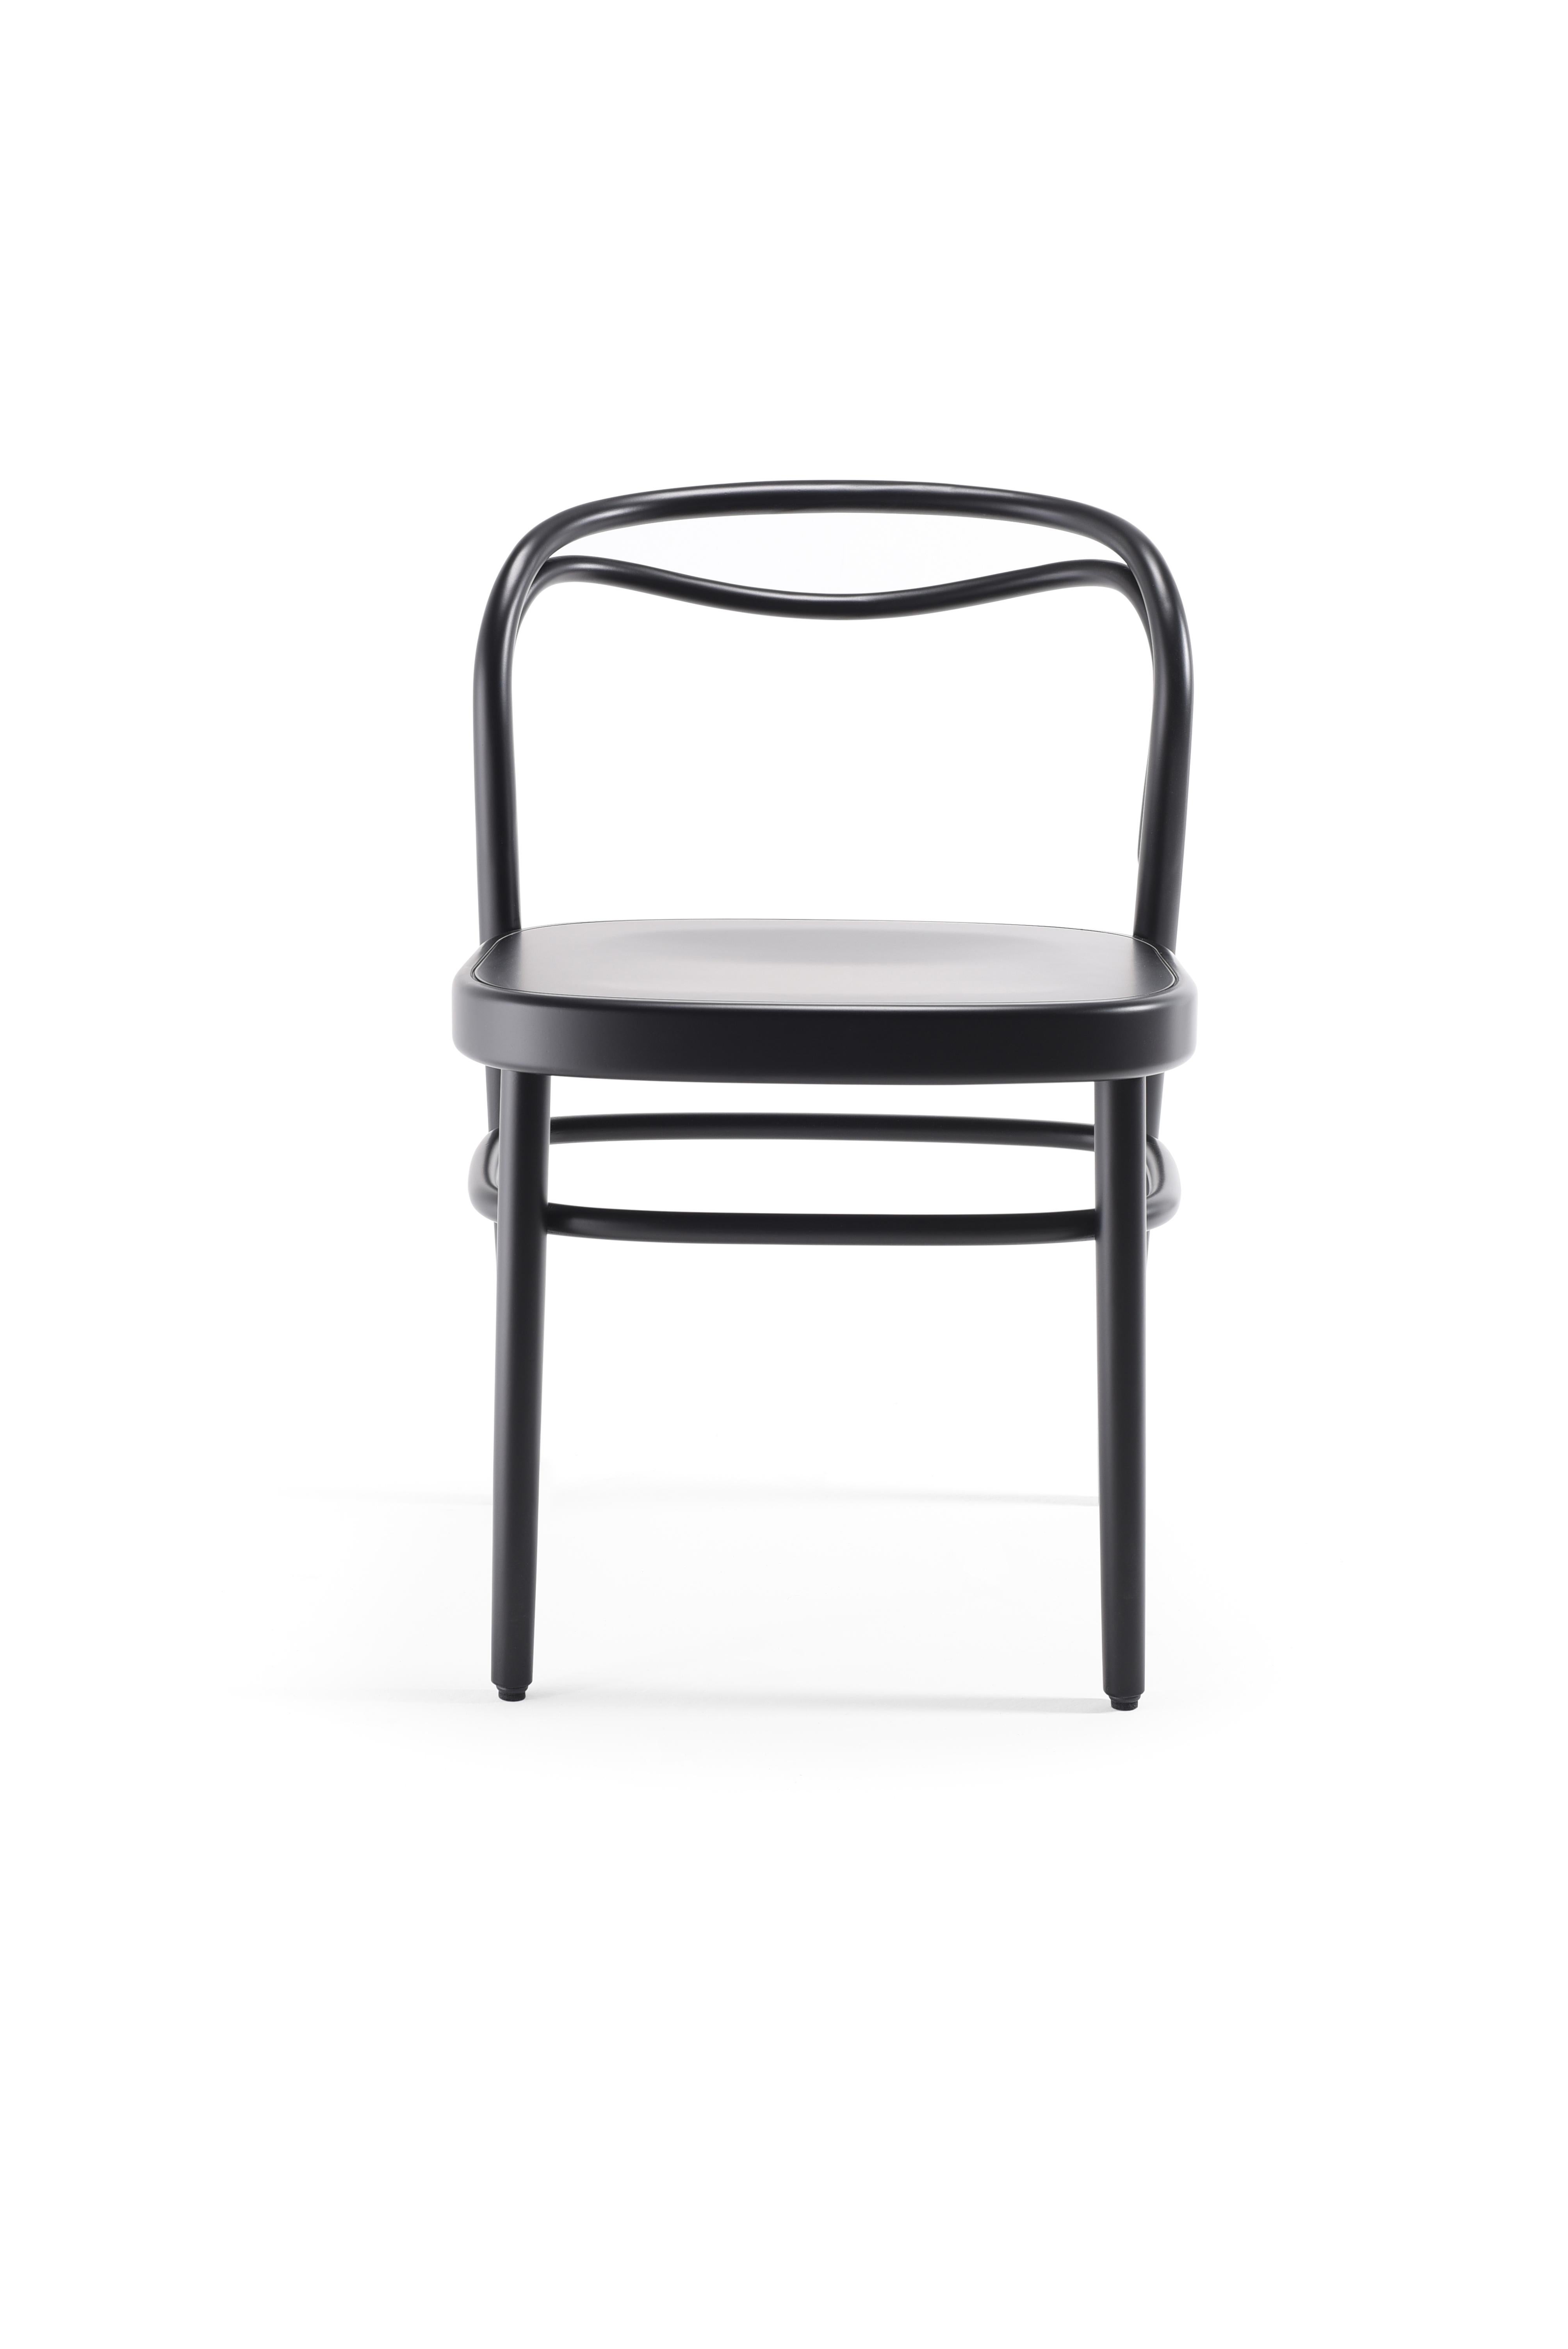 Gebrüder Thonet Vienna Beaulieu Chair with Plywood Seat by Philippe Nigro For Sale 3